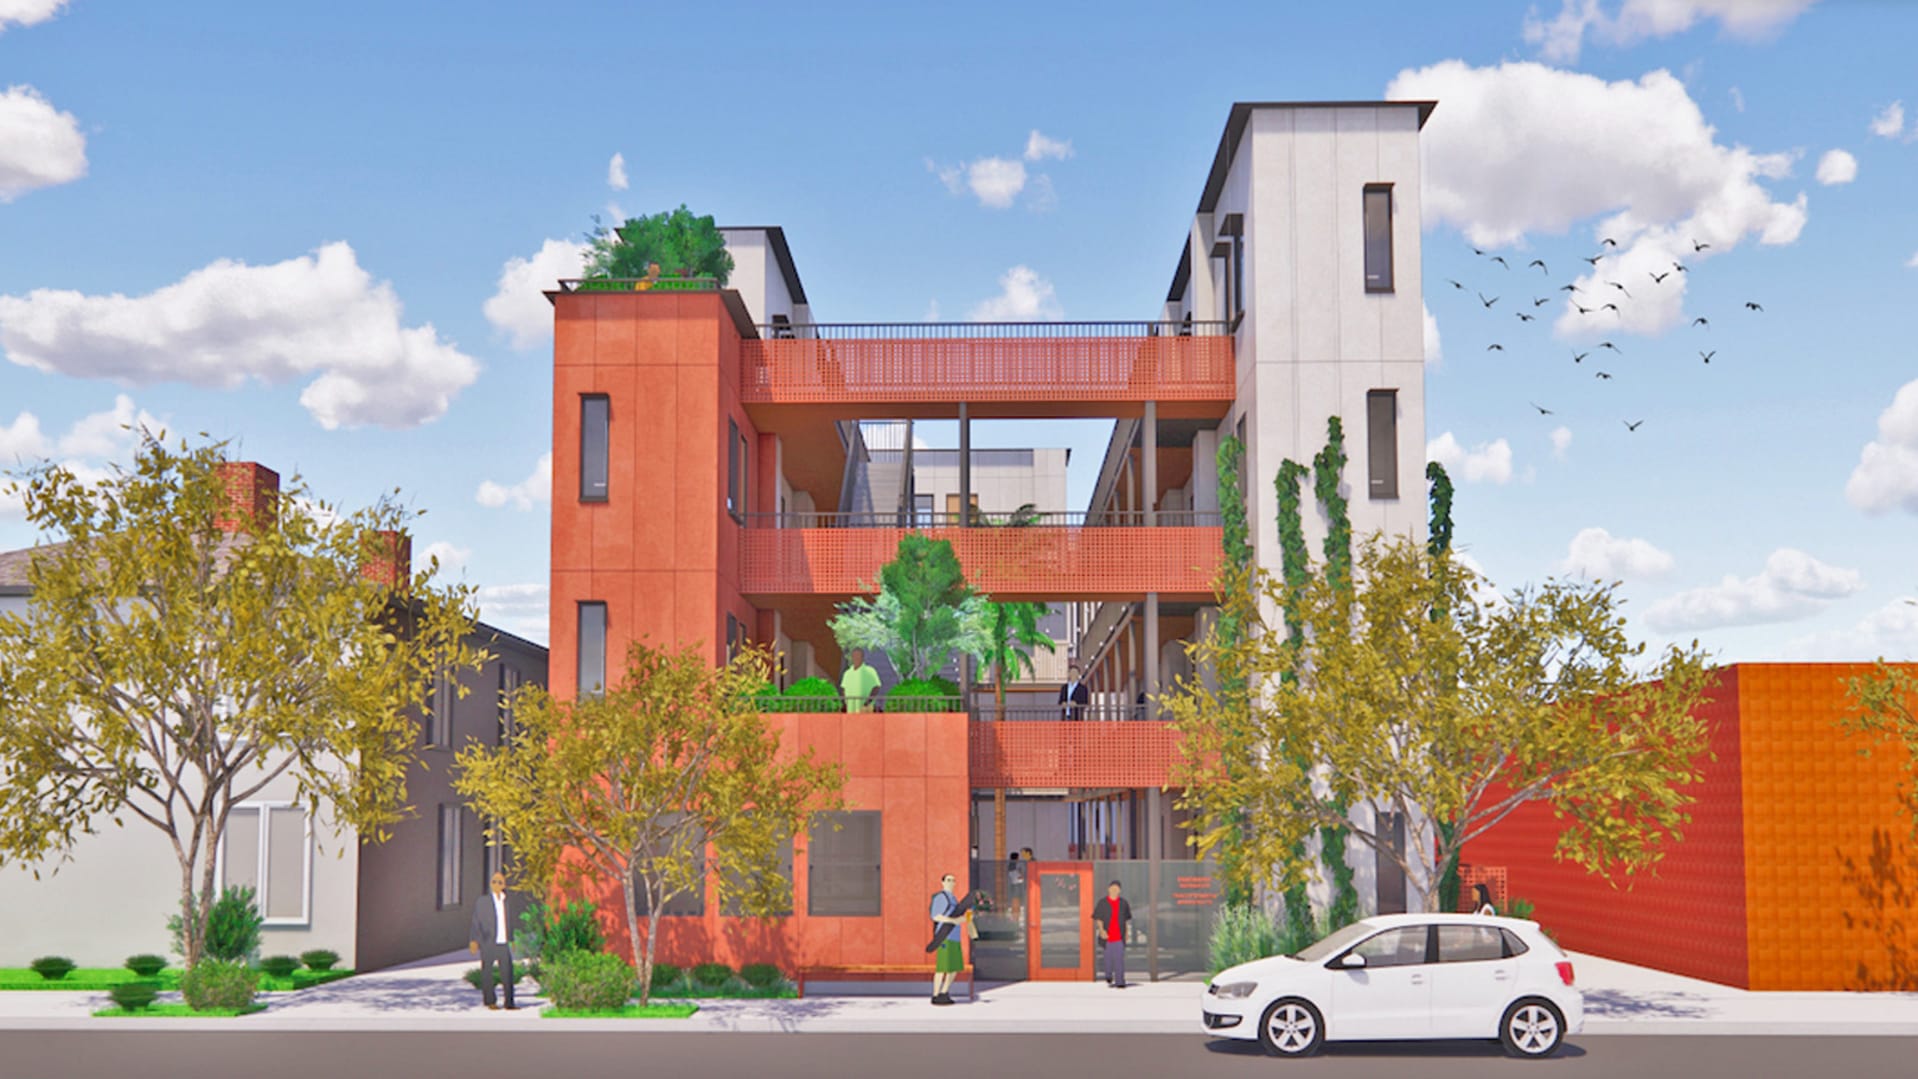 Will these modular apartment buildings help the Bay Area handle its housing crisis?